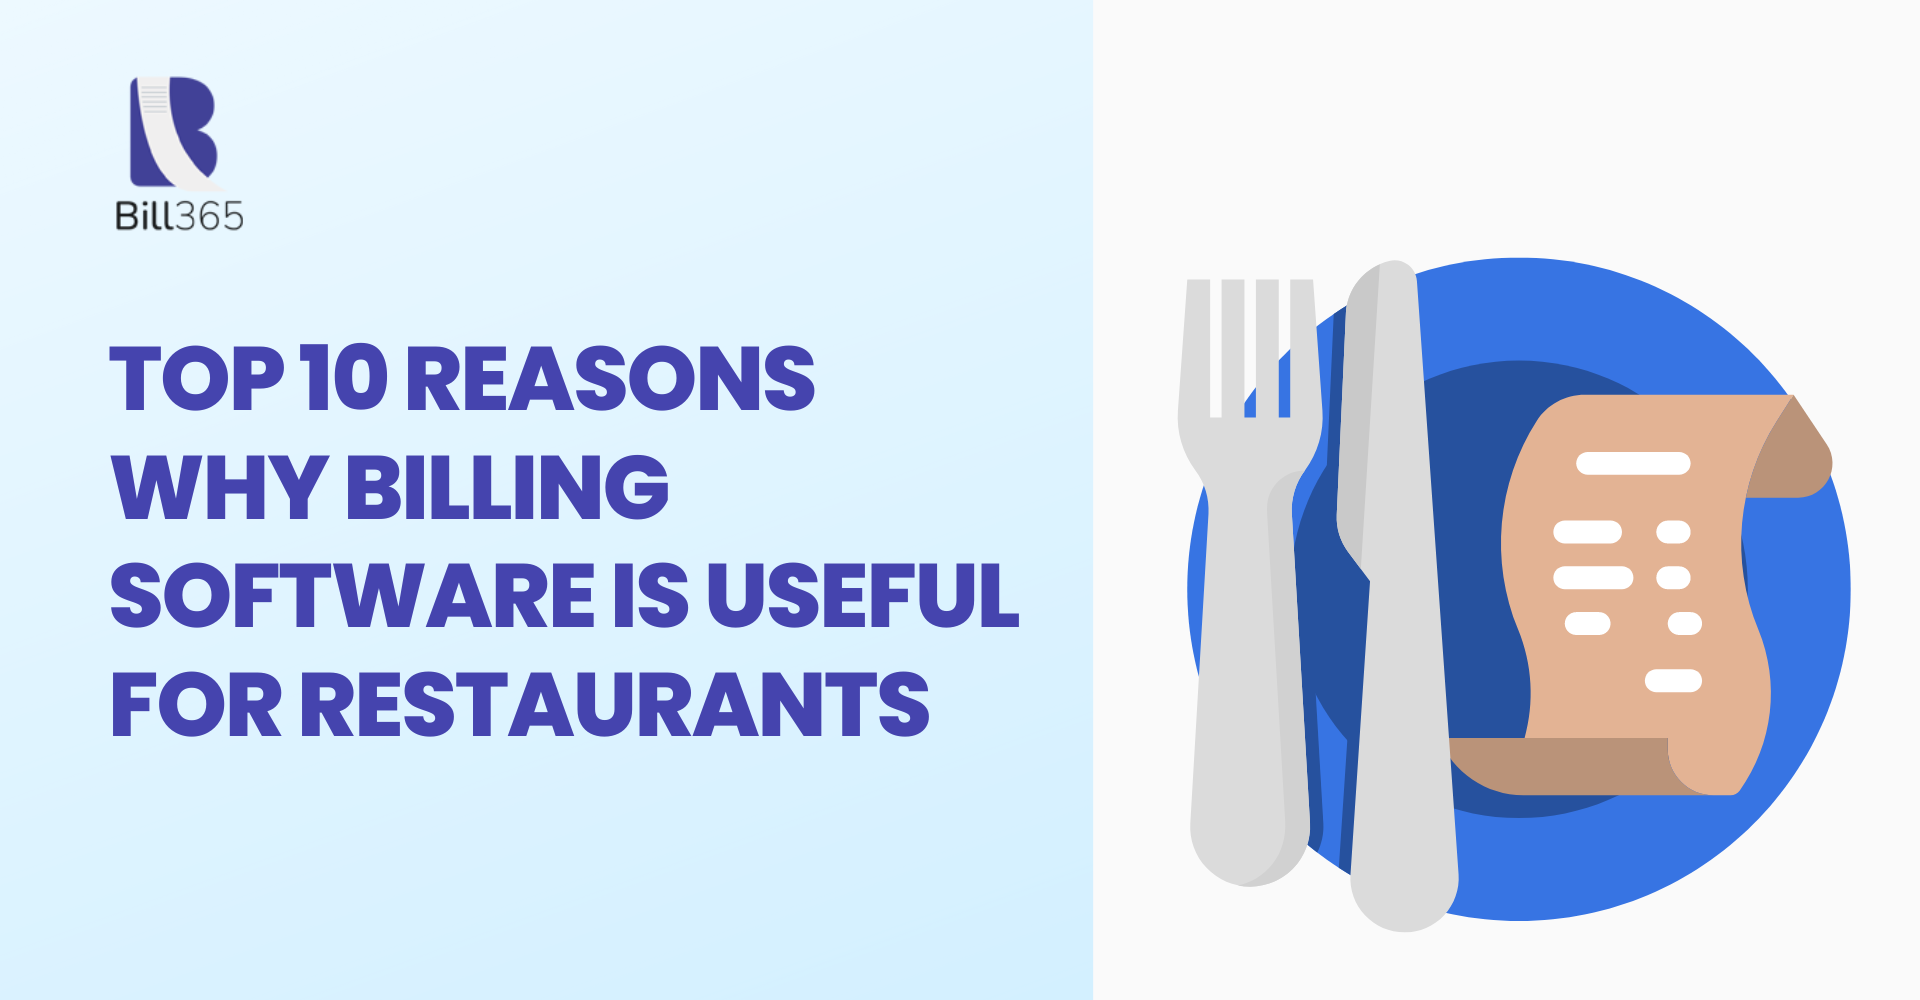 Top 10 Reasons Why Billing Software is Useful for Restaurants